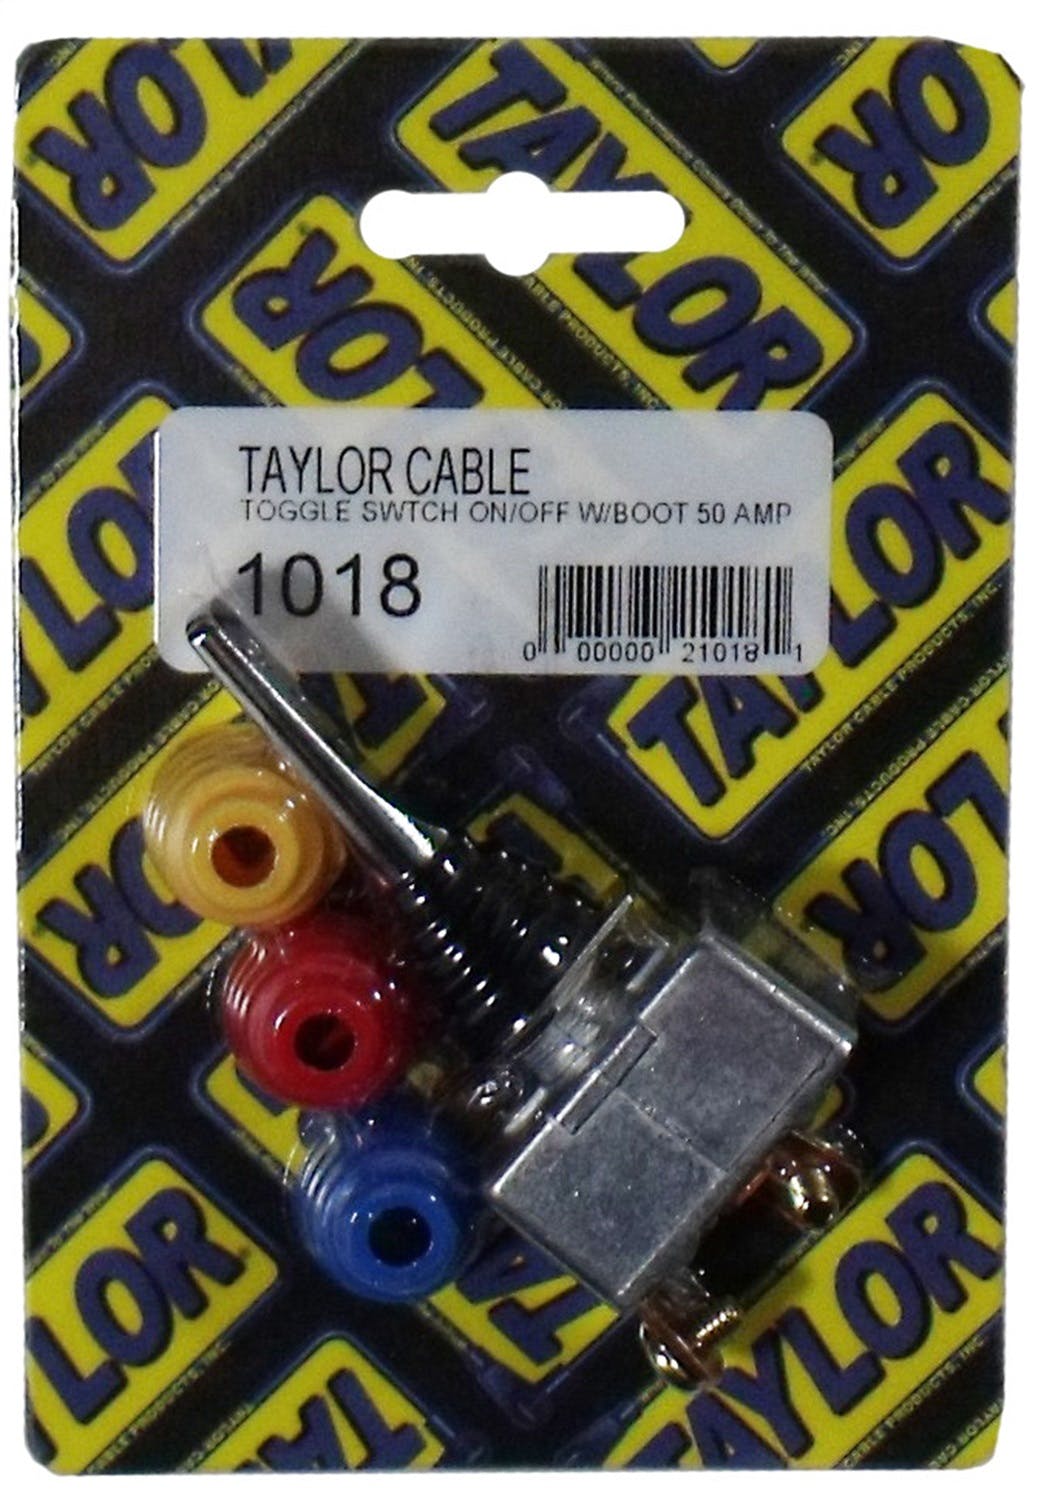 Taylor Cable Products 1018 Toggle Switch on/off w/boot 50 amp